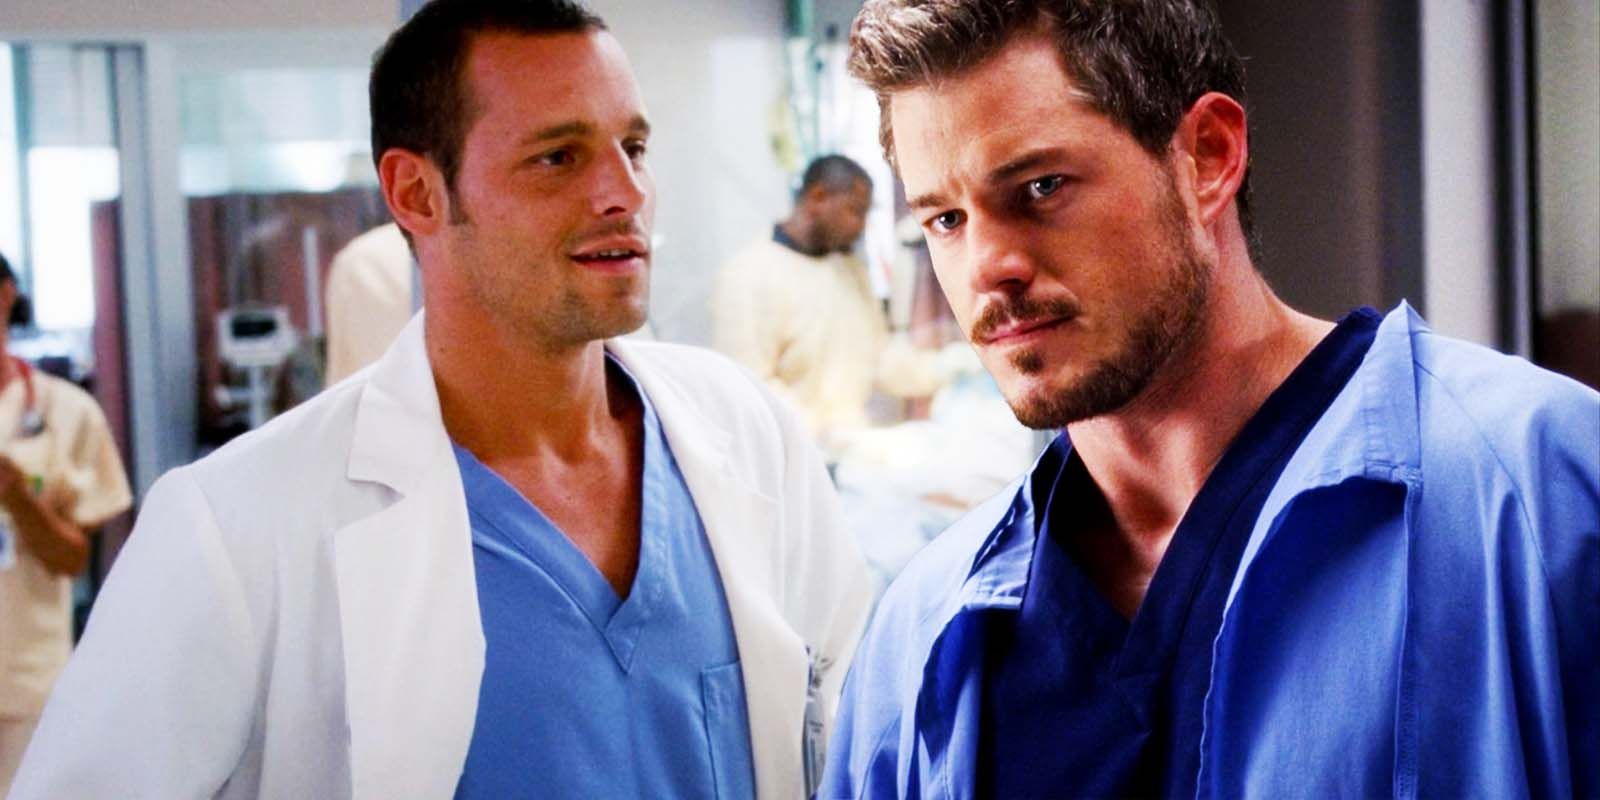 Grey's Anatomy Told You Why Schmitt's Season 20 Specialty Choice Is Wrong 19 Years Ago